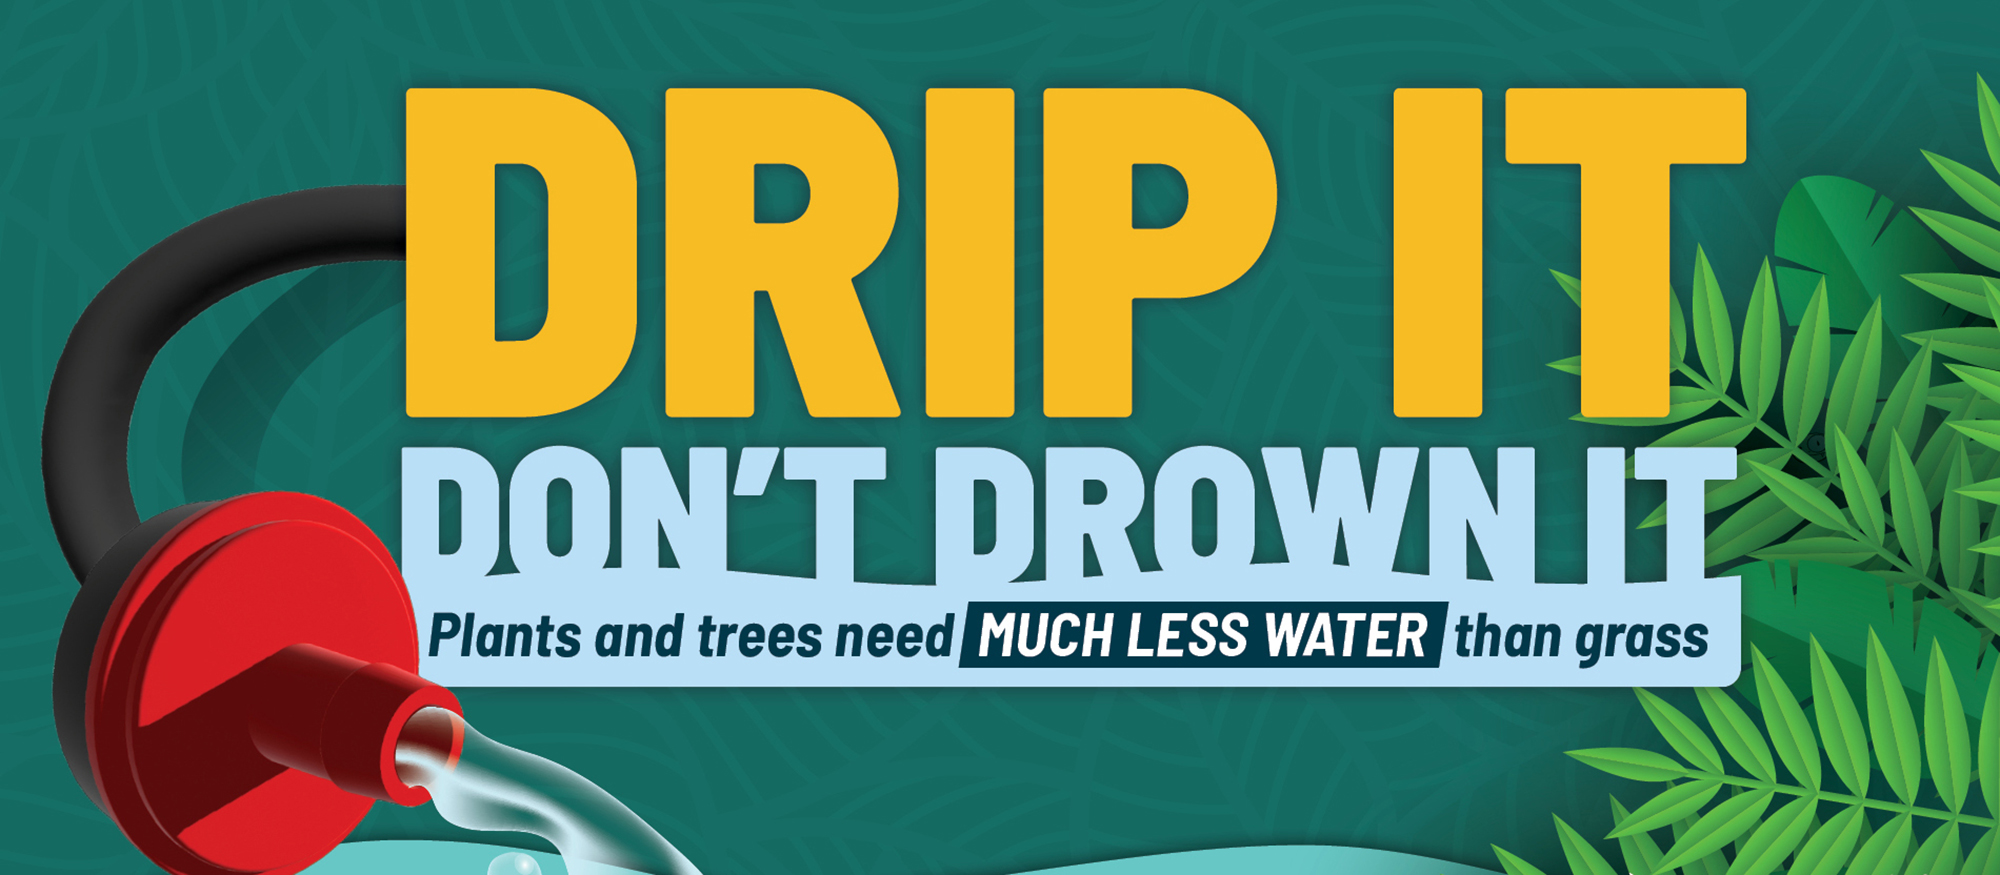 Graphic of drip head says "Drip it, don't drown it"